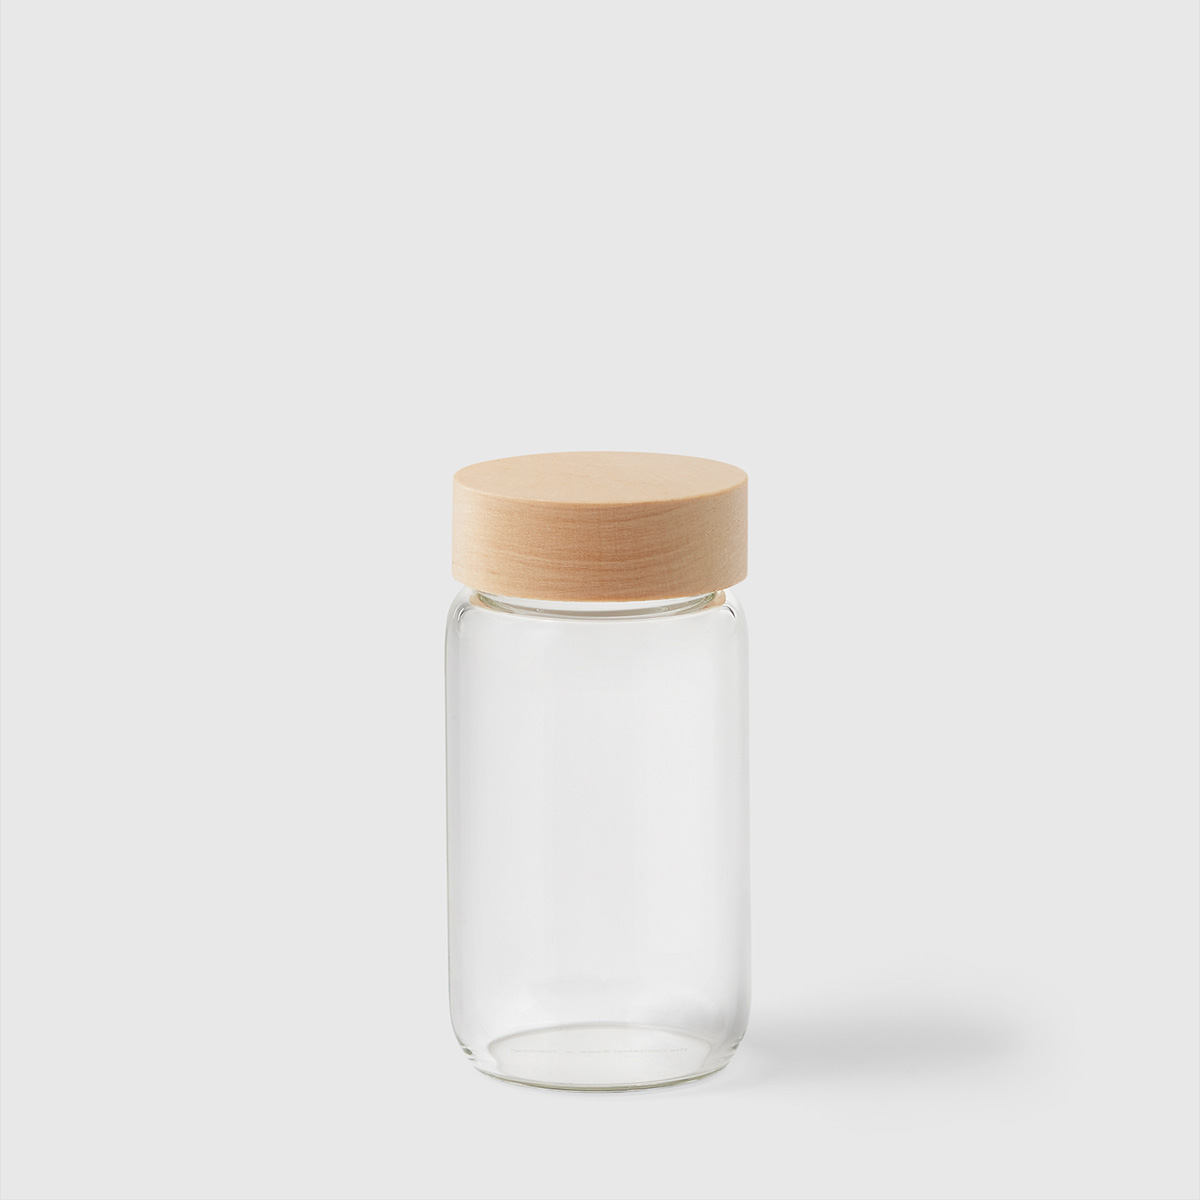 https://www.containerstore.com/catalogimages/441402/10086597_Kon_Mari_small_glass_spice_.jpg